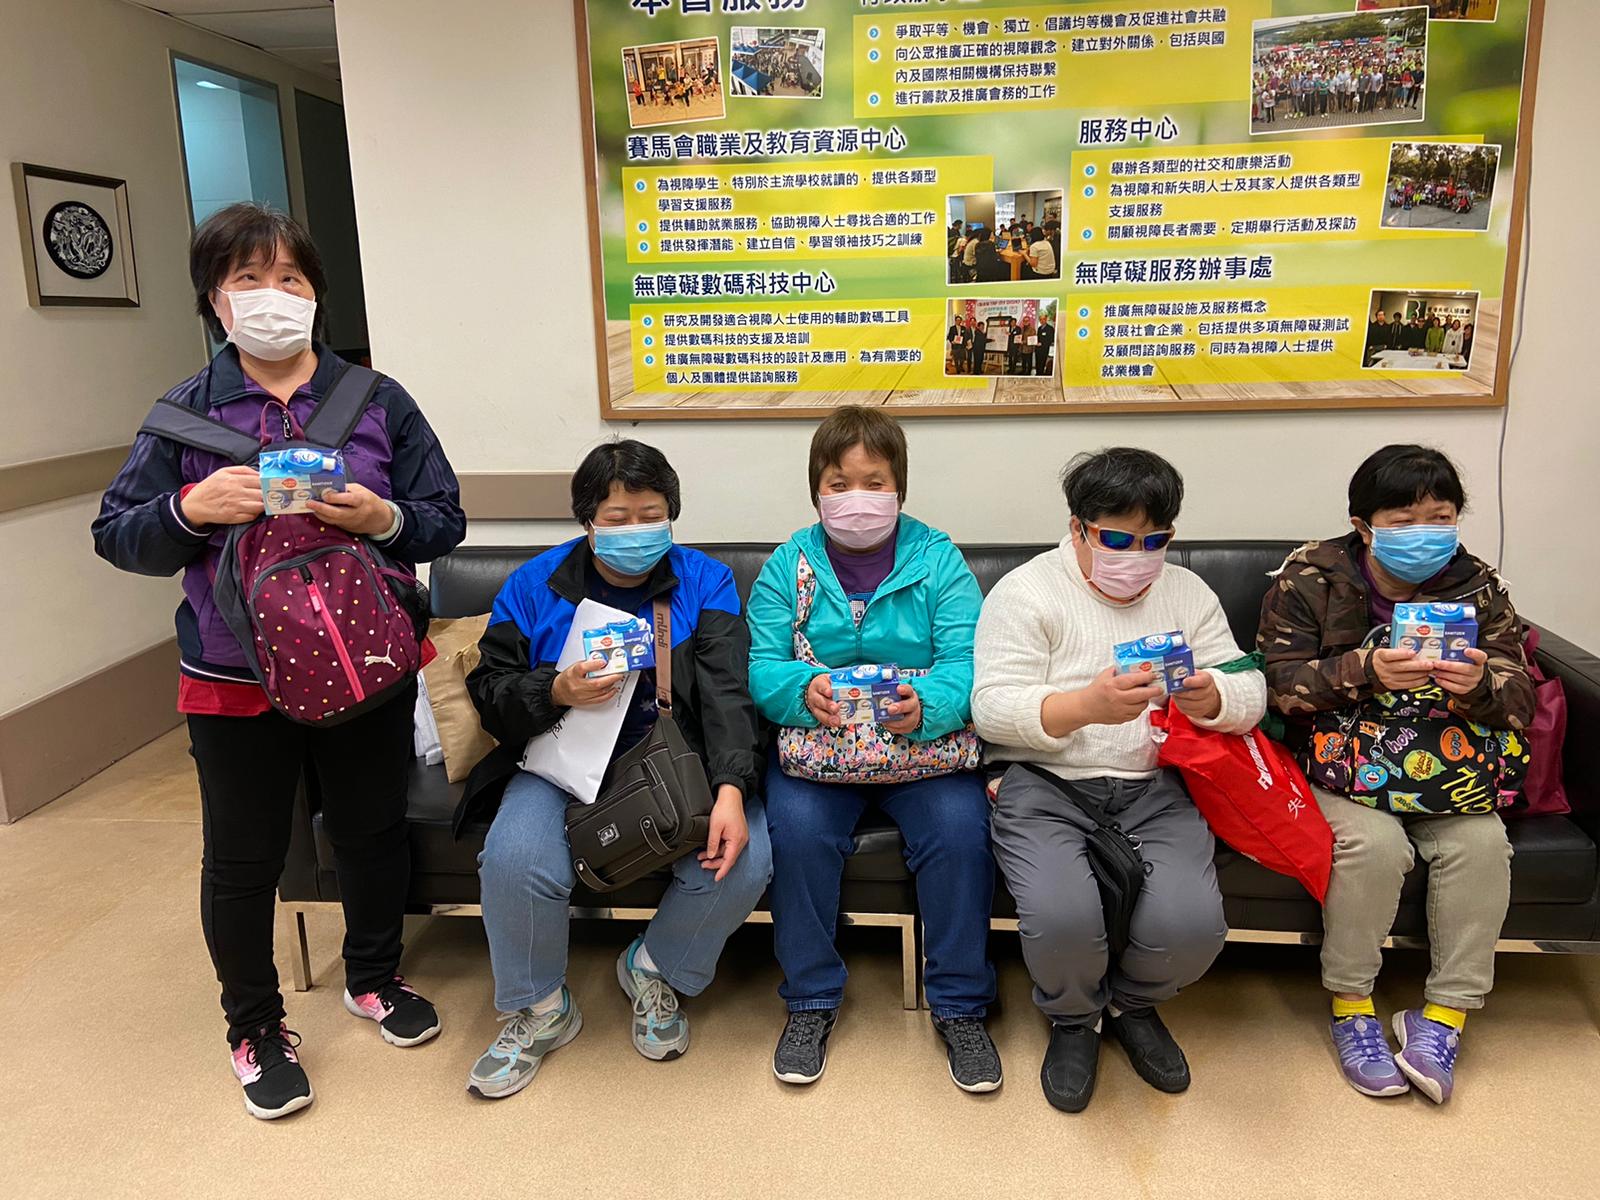 In Hong Kong, seniors, chronically ill patients and low-income families who can’t afford to travel too far often find it more difficult to get a hold of masks and disinfectants. Oxfam Hong Kong provided them with support before Chinese New Year.